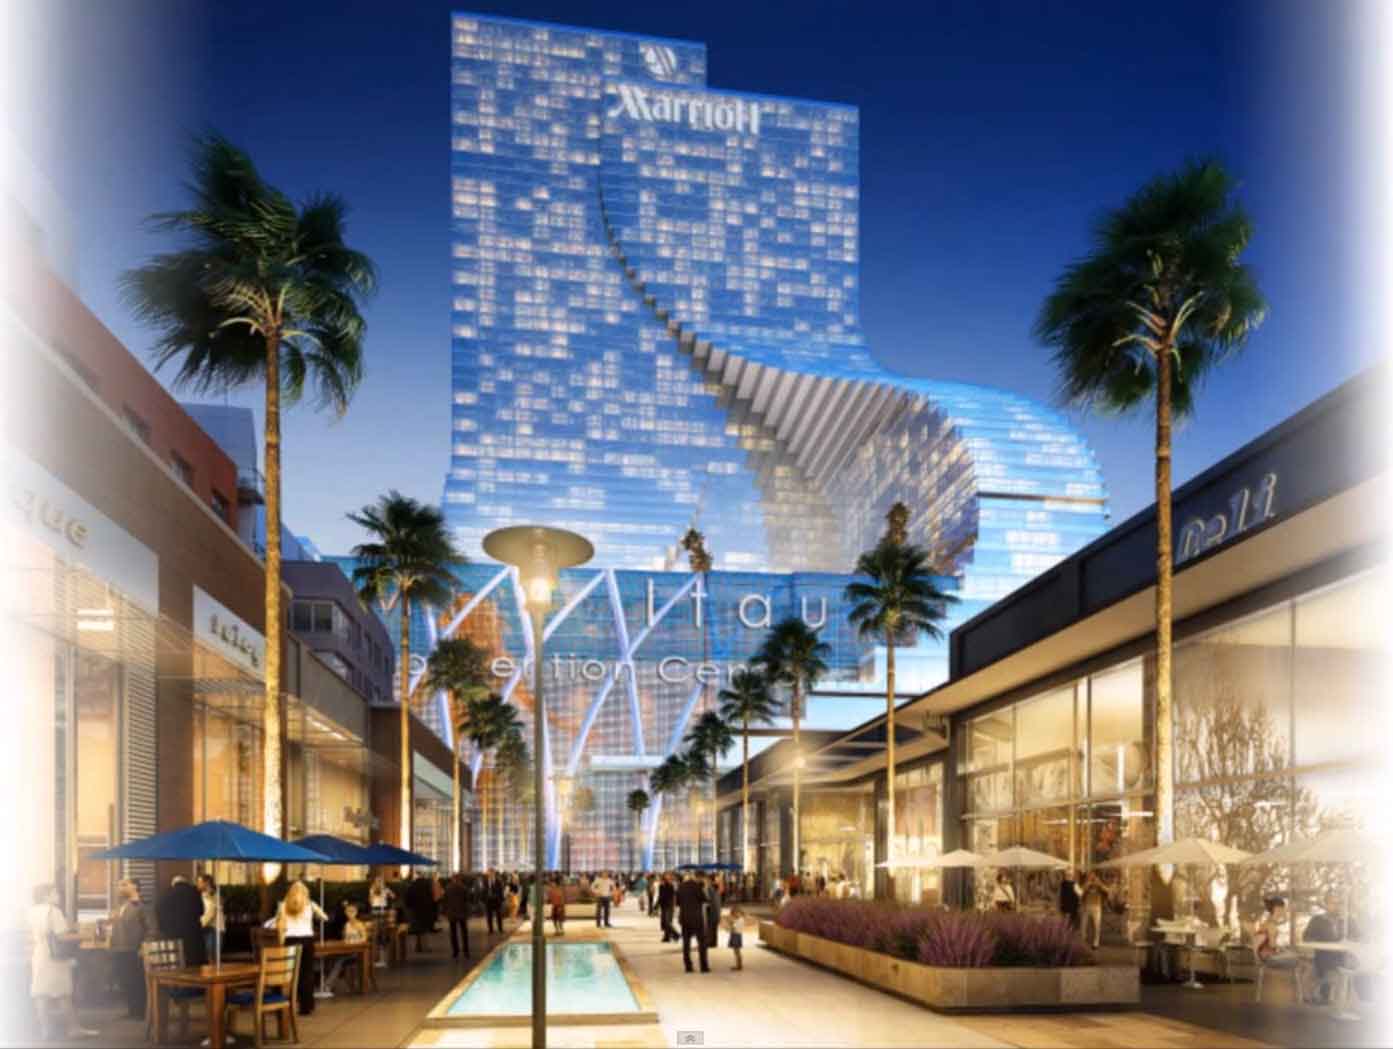 Miami Worldcenter’s $750 Million Marriott Marquis Hotel & Expo Plans Revealed